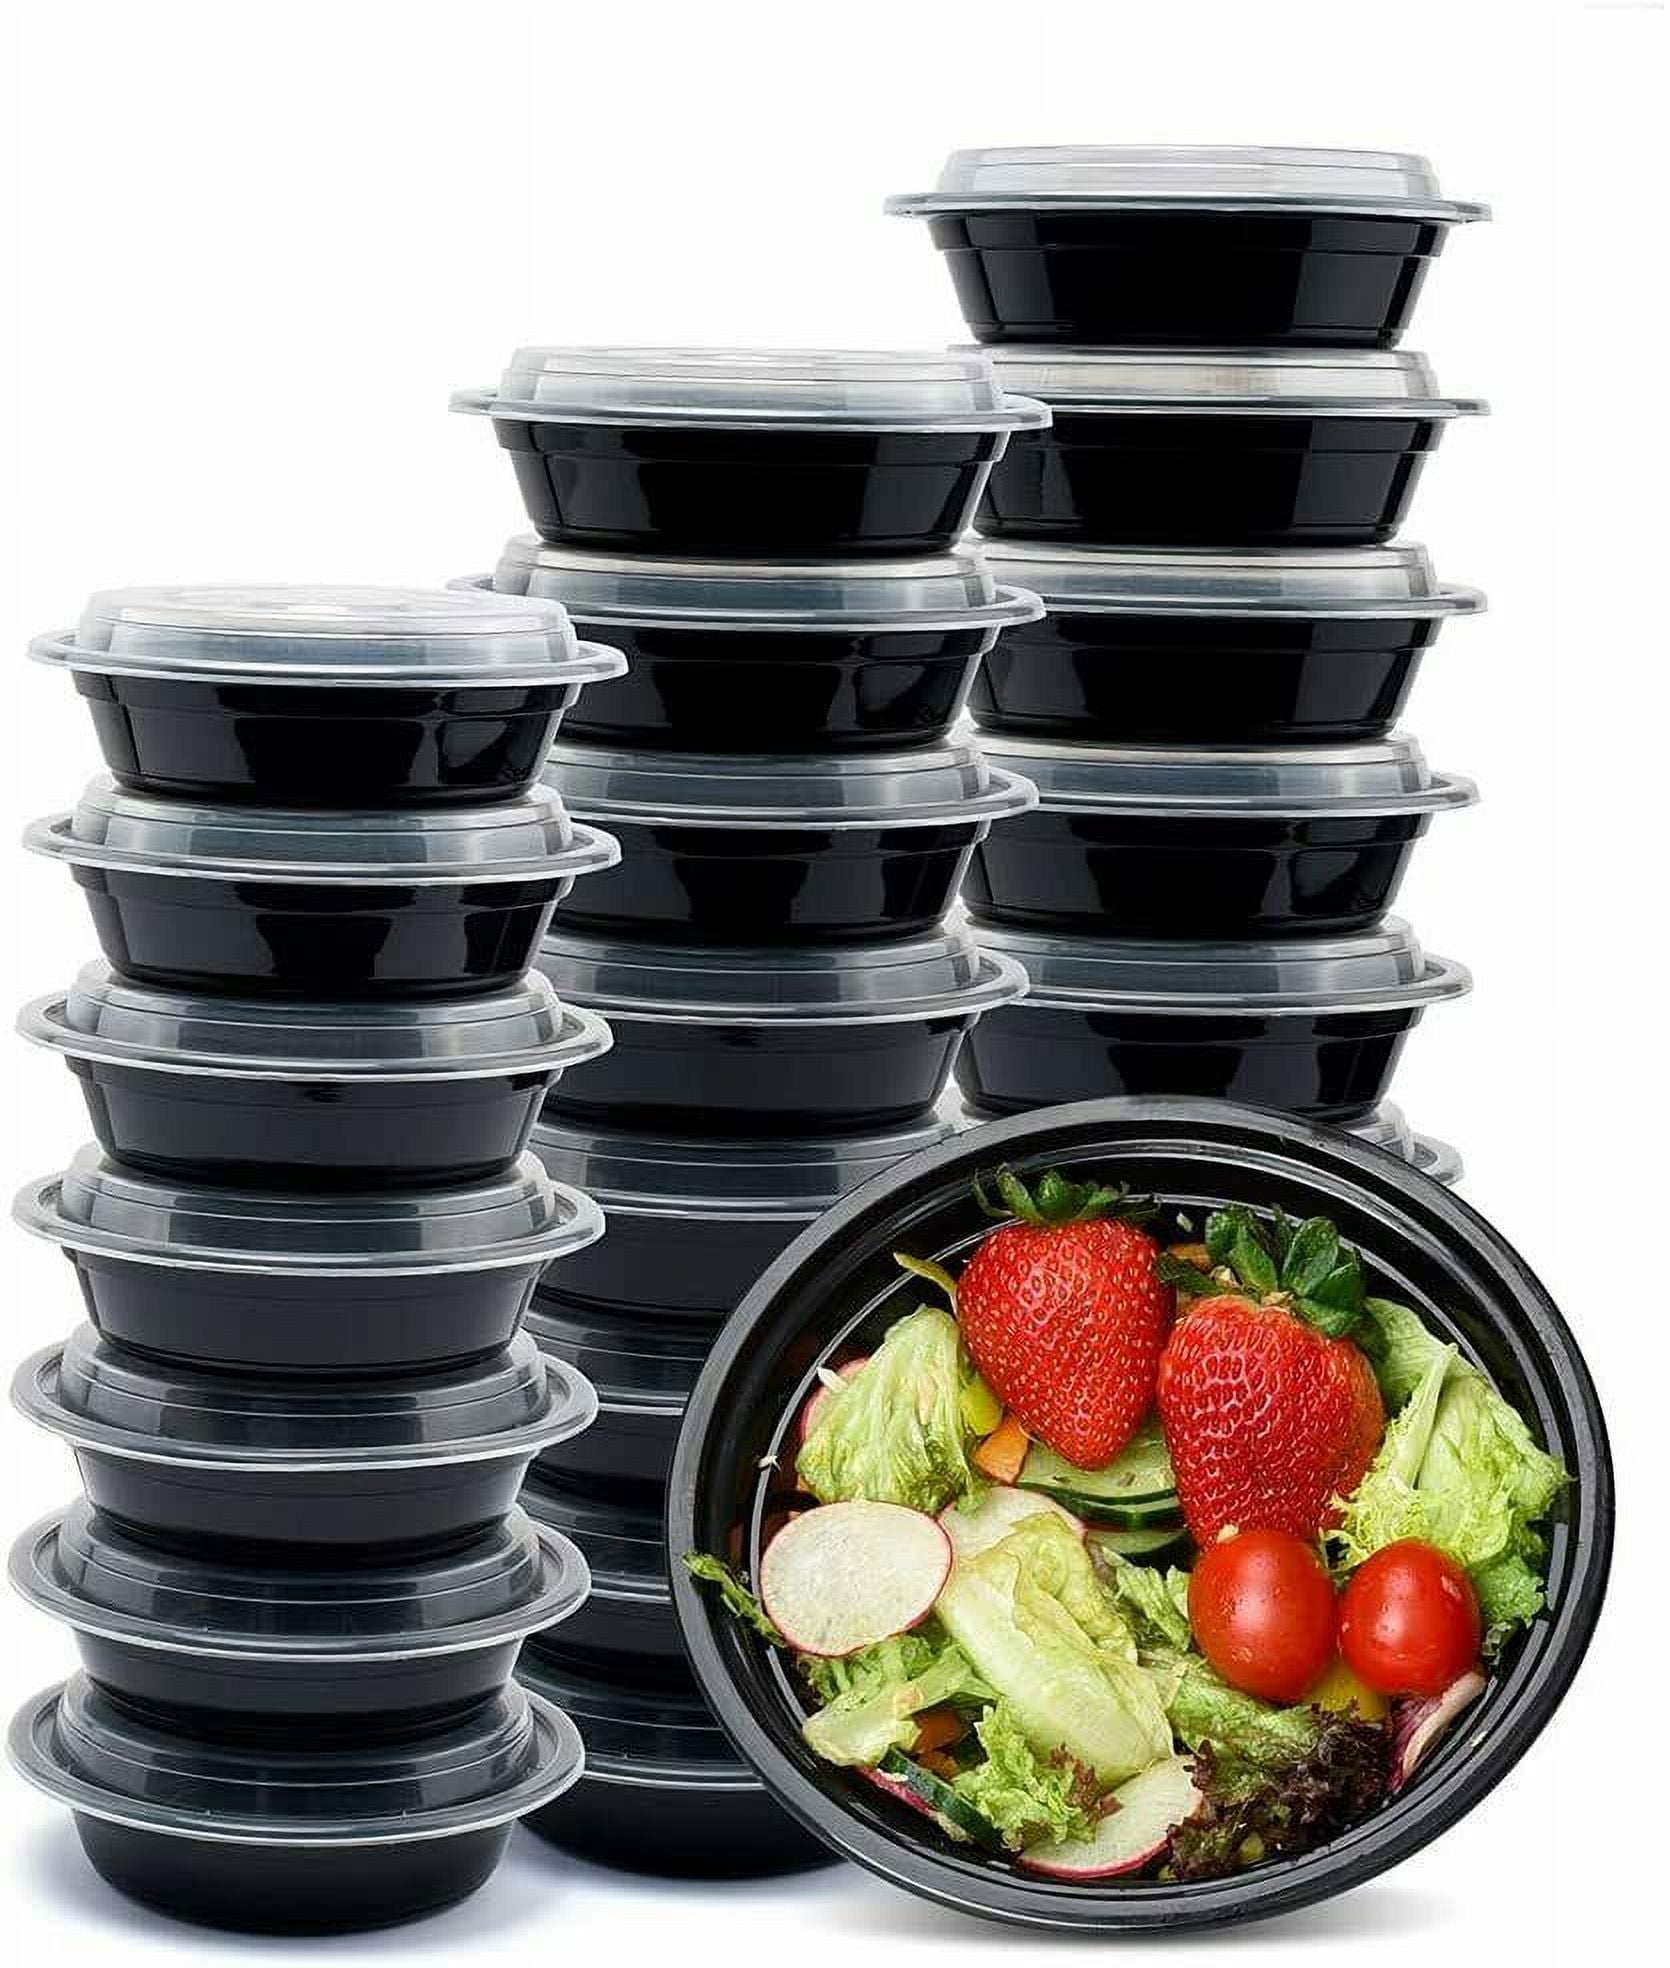 Futura 20 Ounce Meal Prep Containers with Lids, 100 Microwavable to Go Containers - 2 Wide Compartments, Disposable, Silver Plastic Food Containers Wi